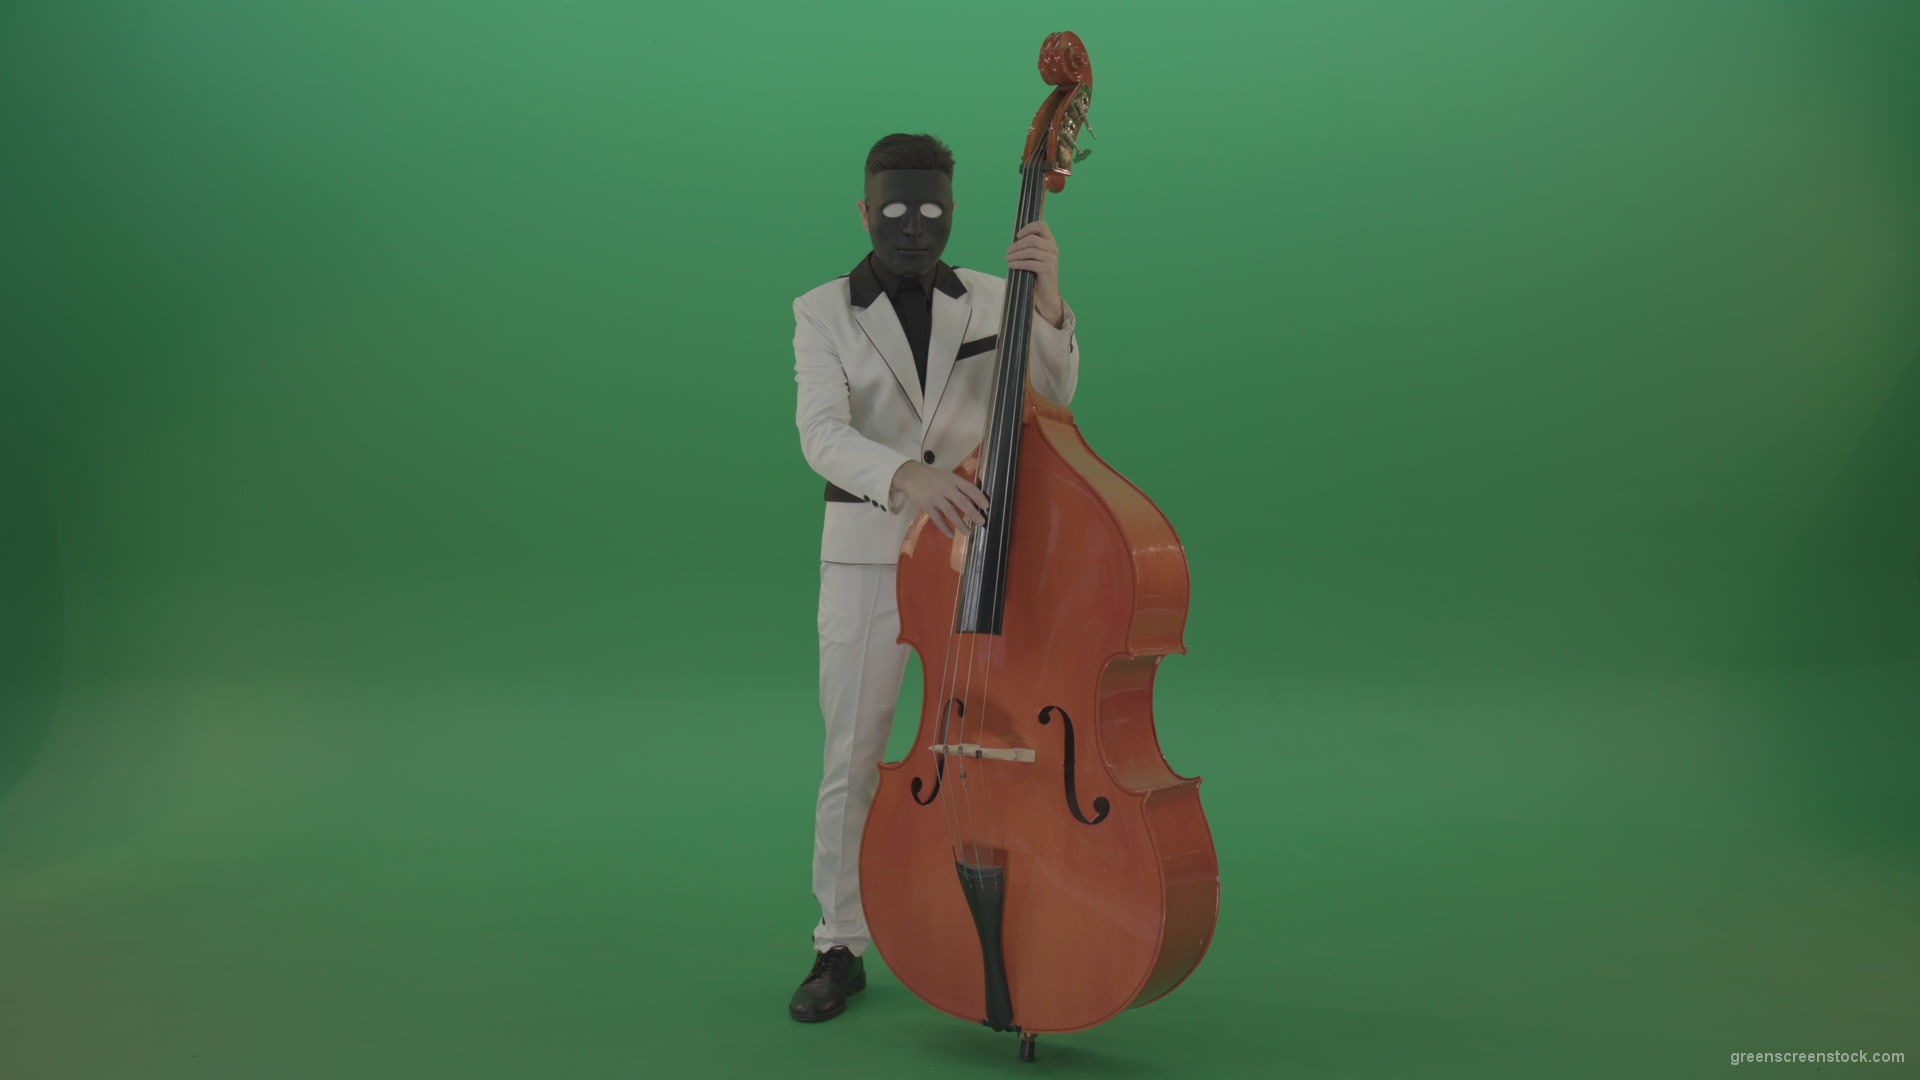 Man-in-white-costume-and-blac-mask-play-jazz-music-on-double-bass-orchestra-music-instument-isolated-on-green-screen_005 Green Screen Stock